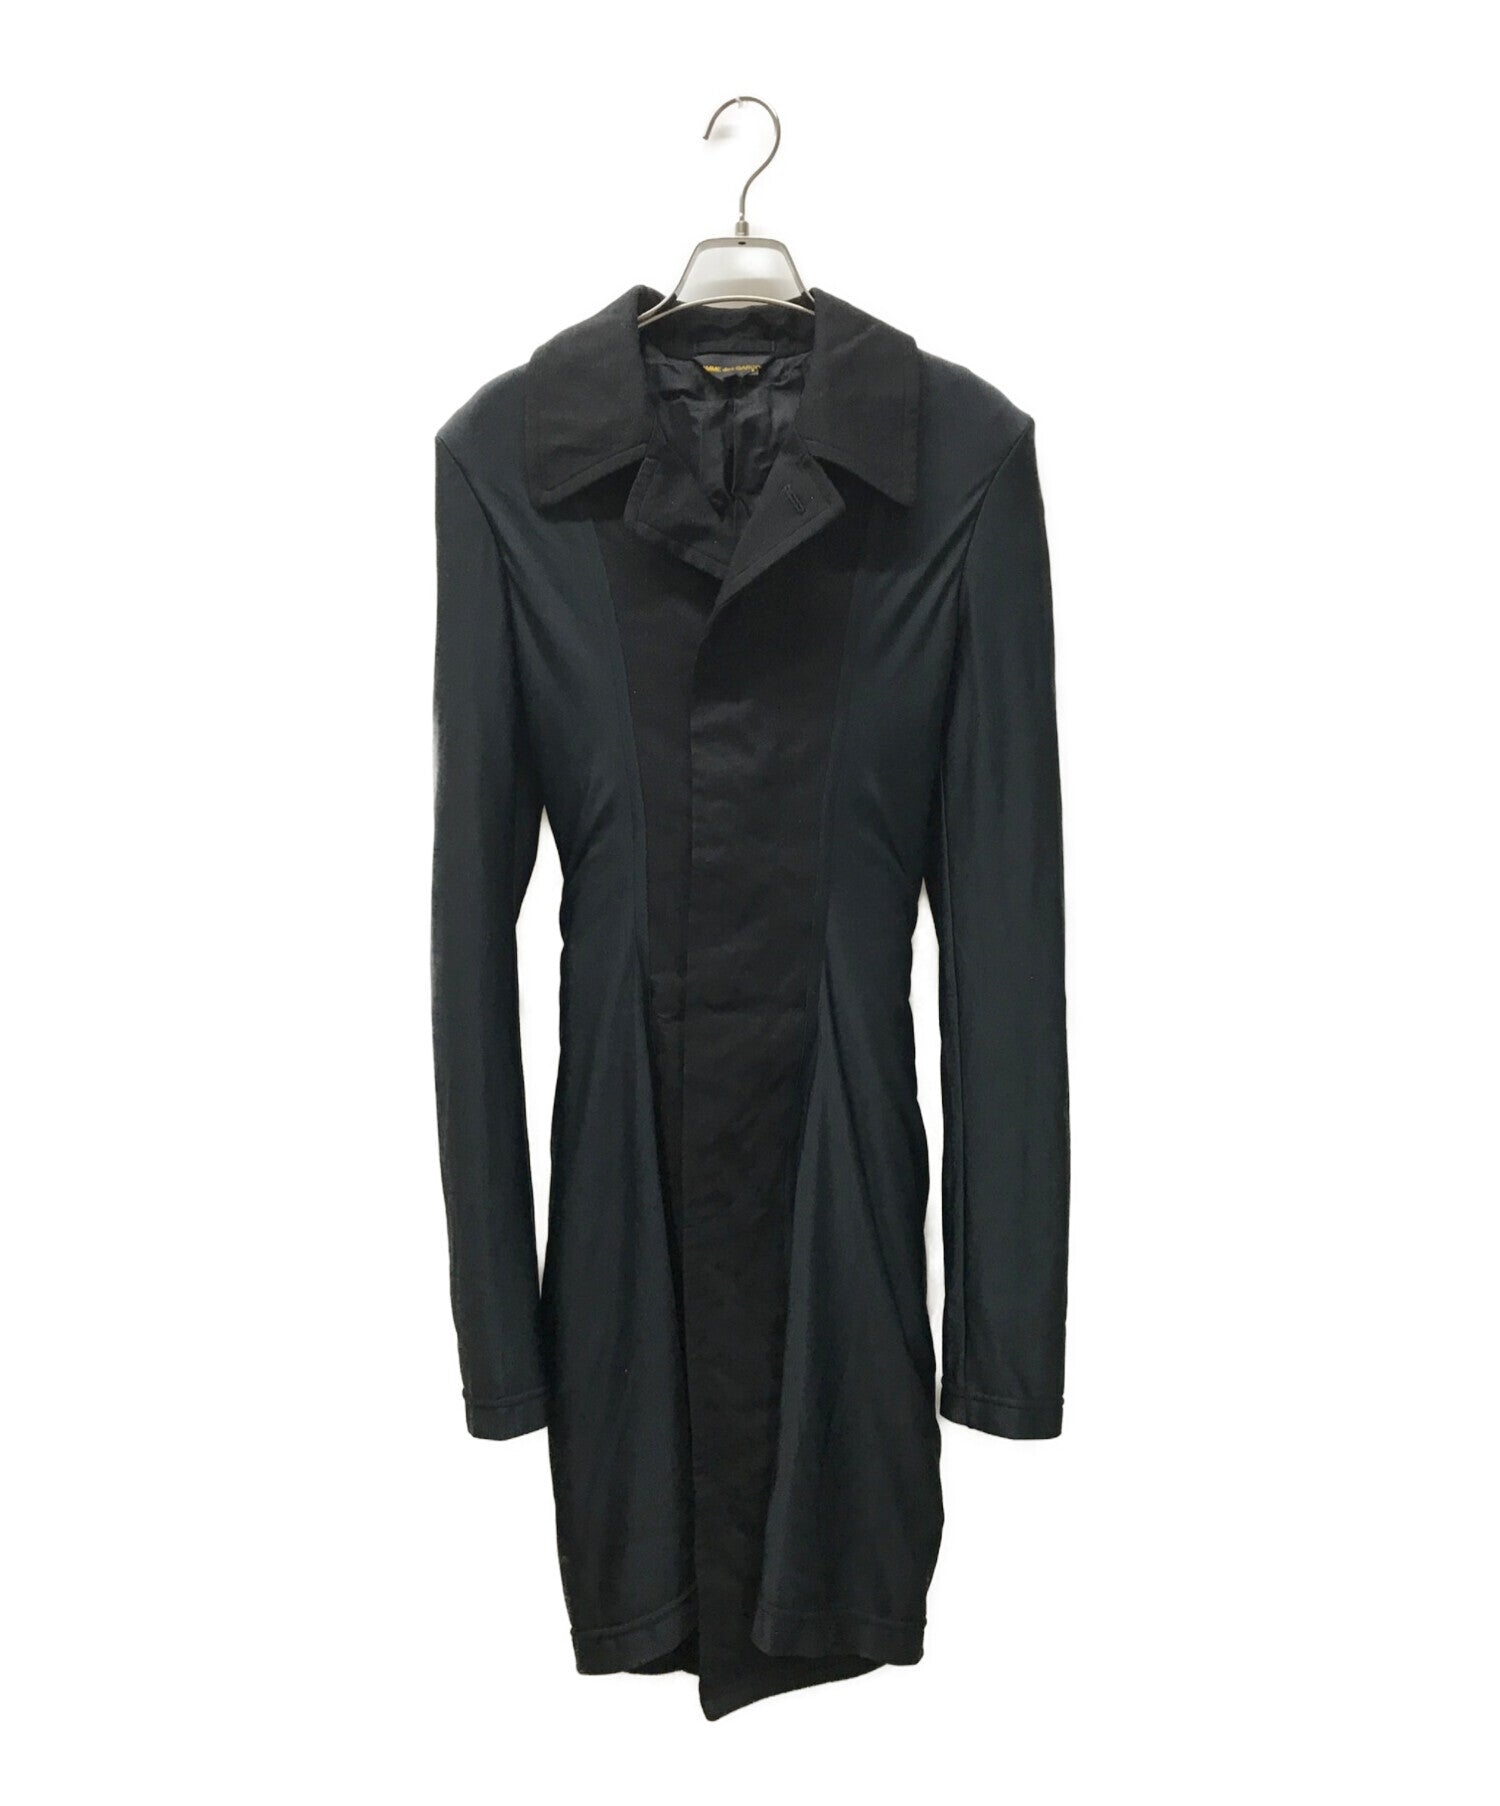 COMME des GARCONS Tight coat with different material switching GT-C011